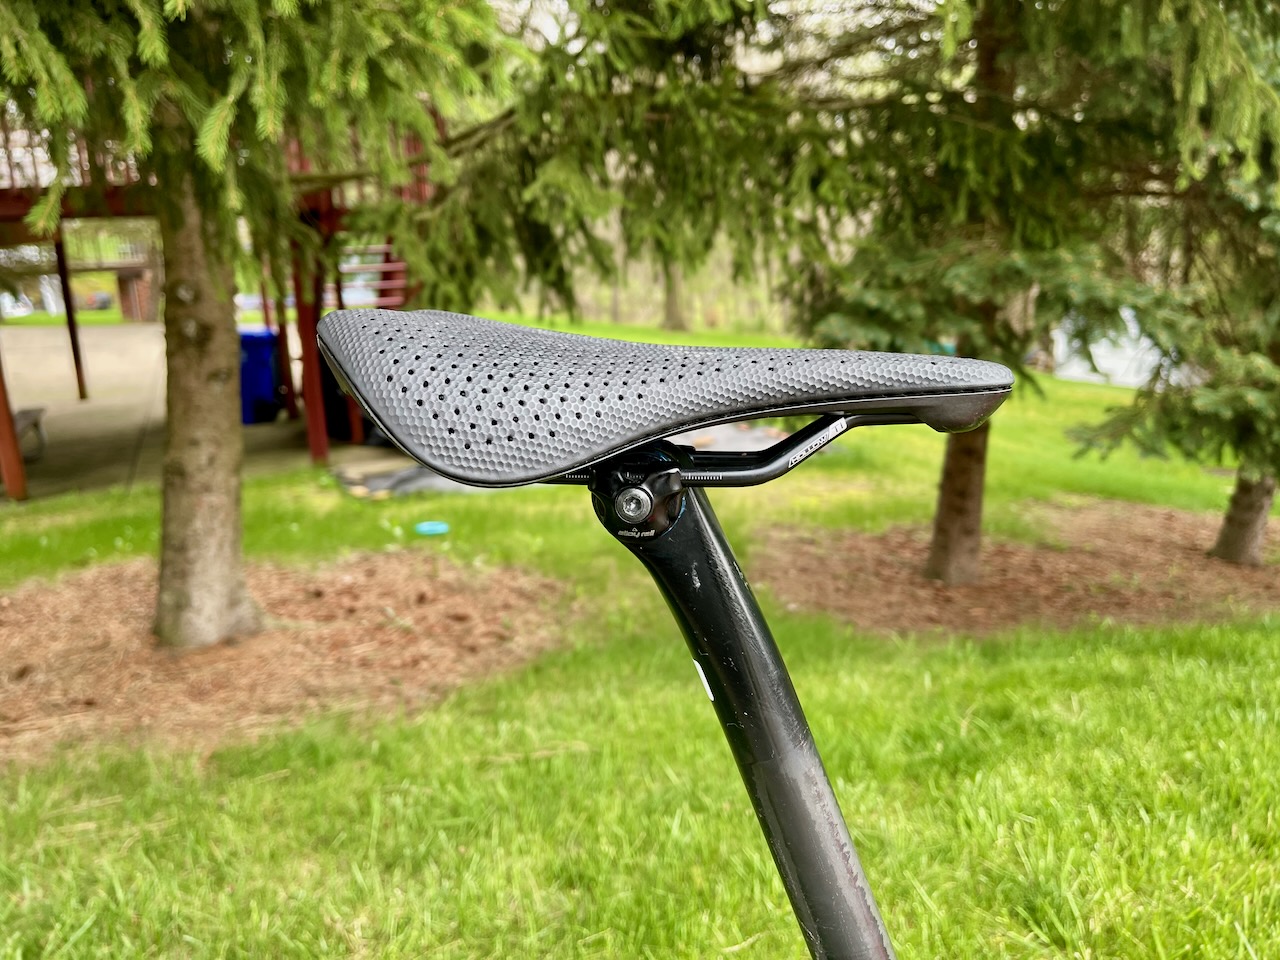 SPECIALIZED POWER PRO MIRROR 143mm チタンTi